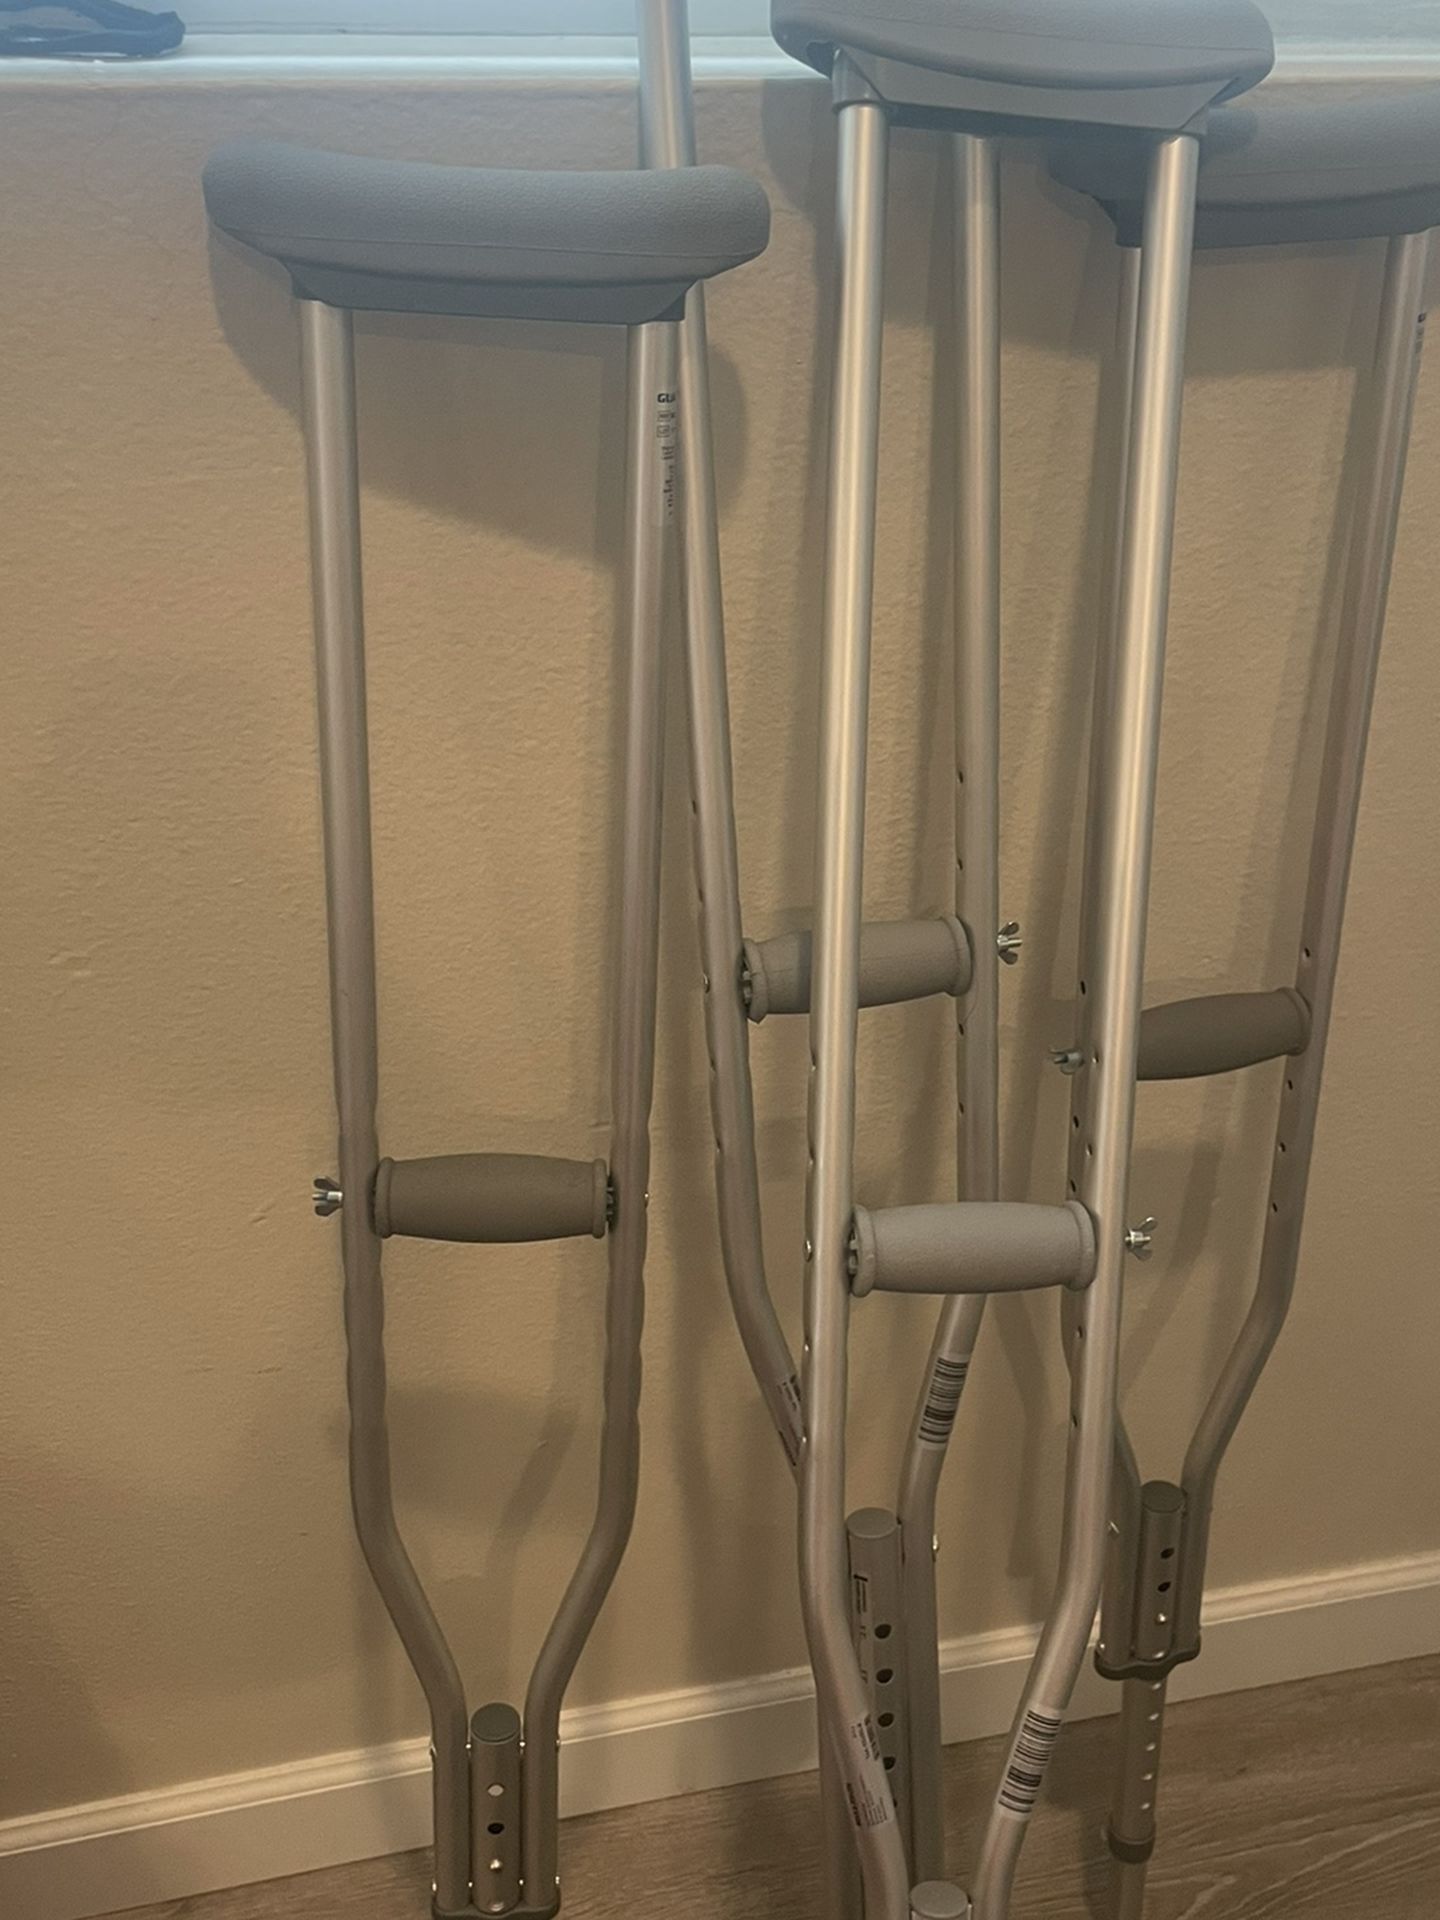 Crutches Sold Seperate 